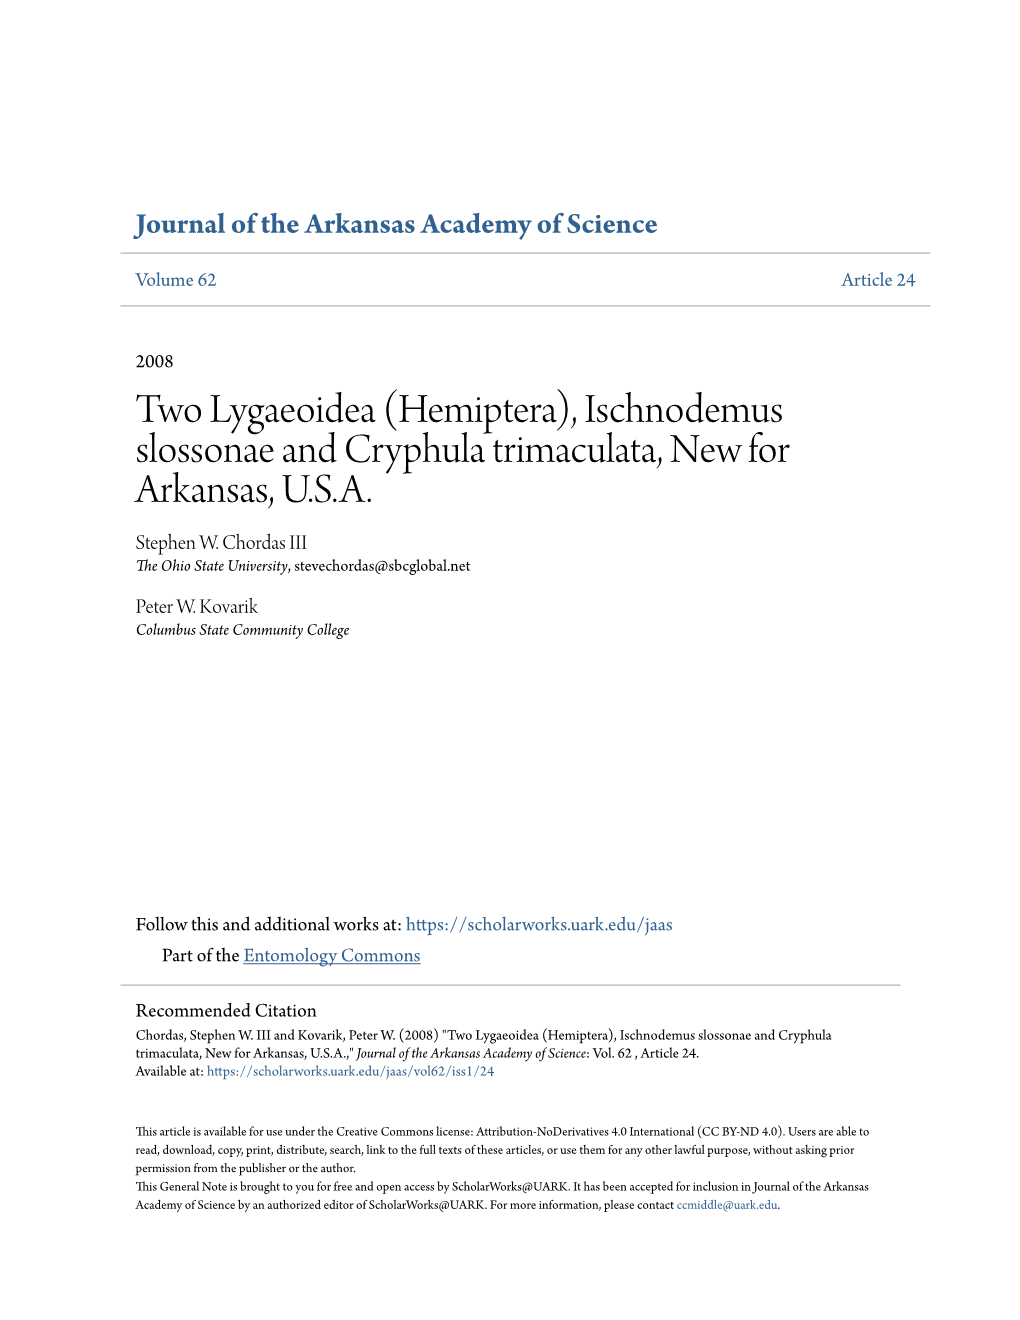 Ischnodemus Slossonae and Cryphula Trimaculata, New for Arkansas, U.S.A